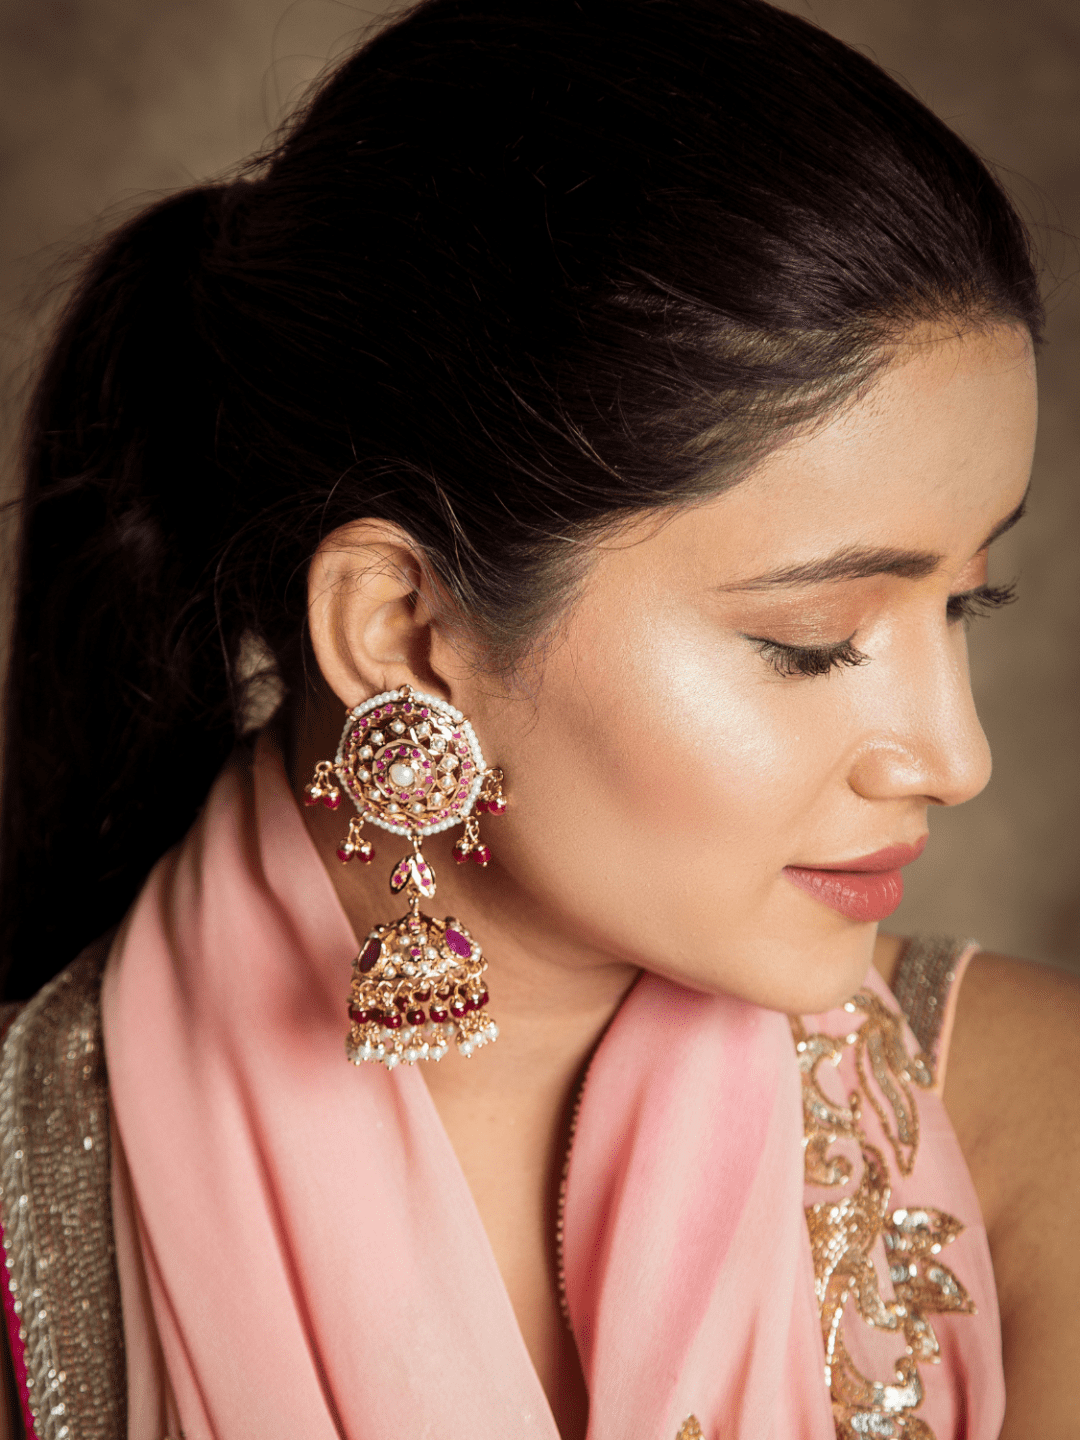 New Crystal Indian Jhumka Ethnic Gypsy Small Bell Beads Drop Earrings Bridal  Party Jewelry Rhinestone Gold